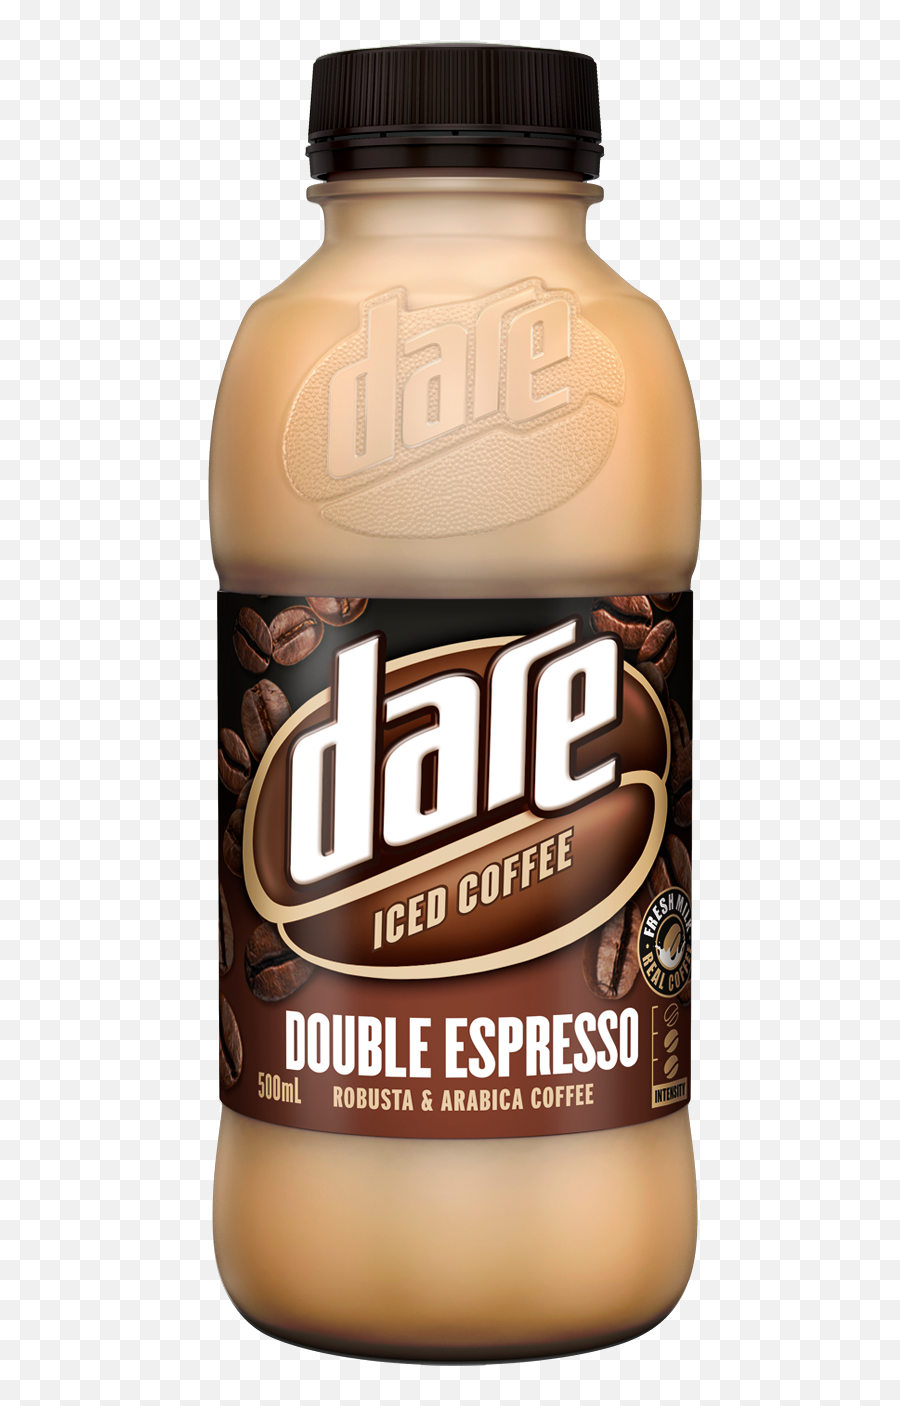 Dare Iced Coffee Png